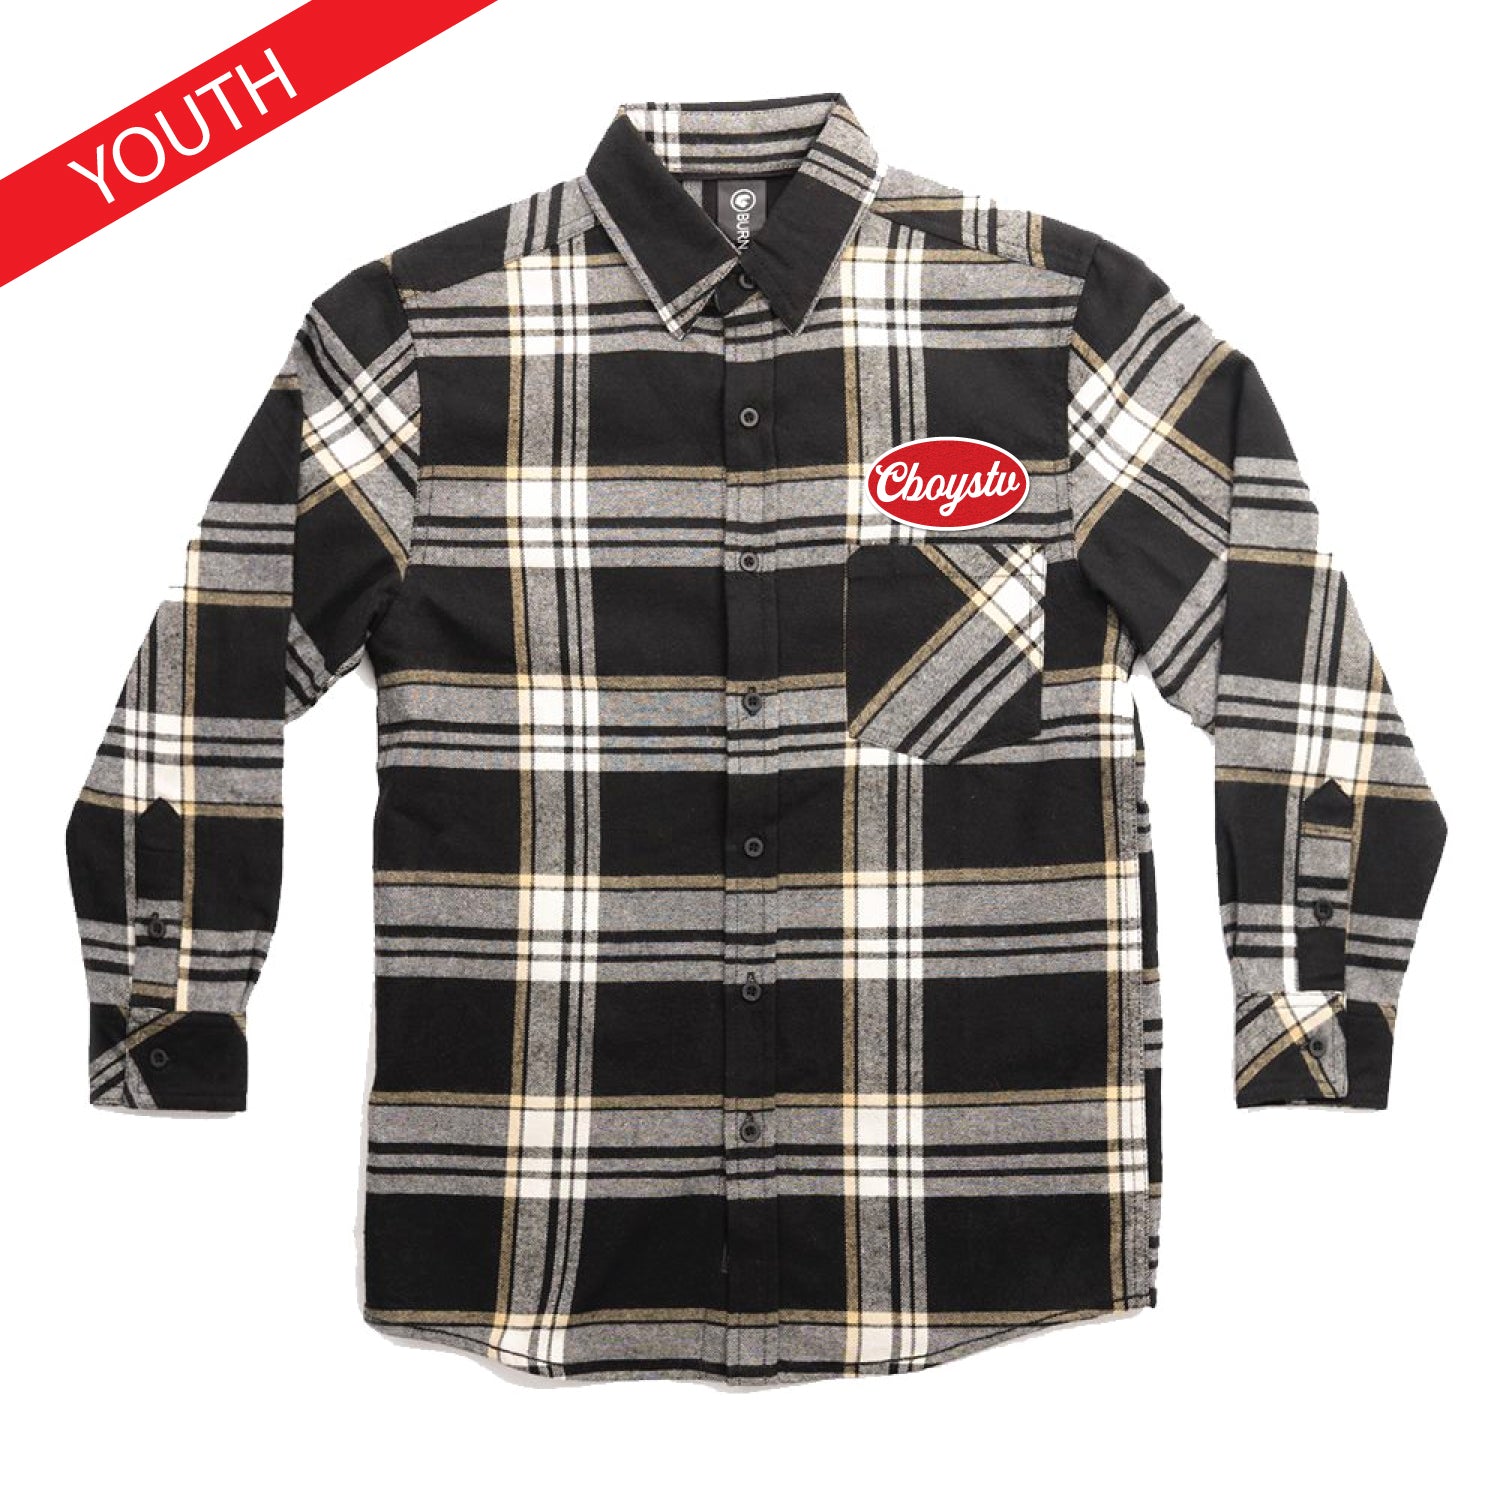 YOUTH - Super Trucker Flannel